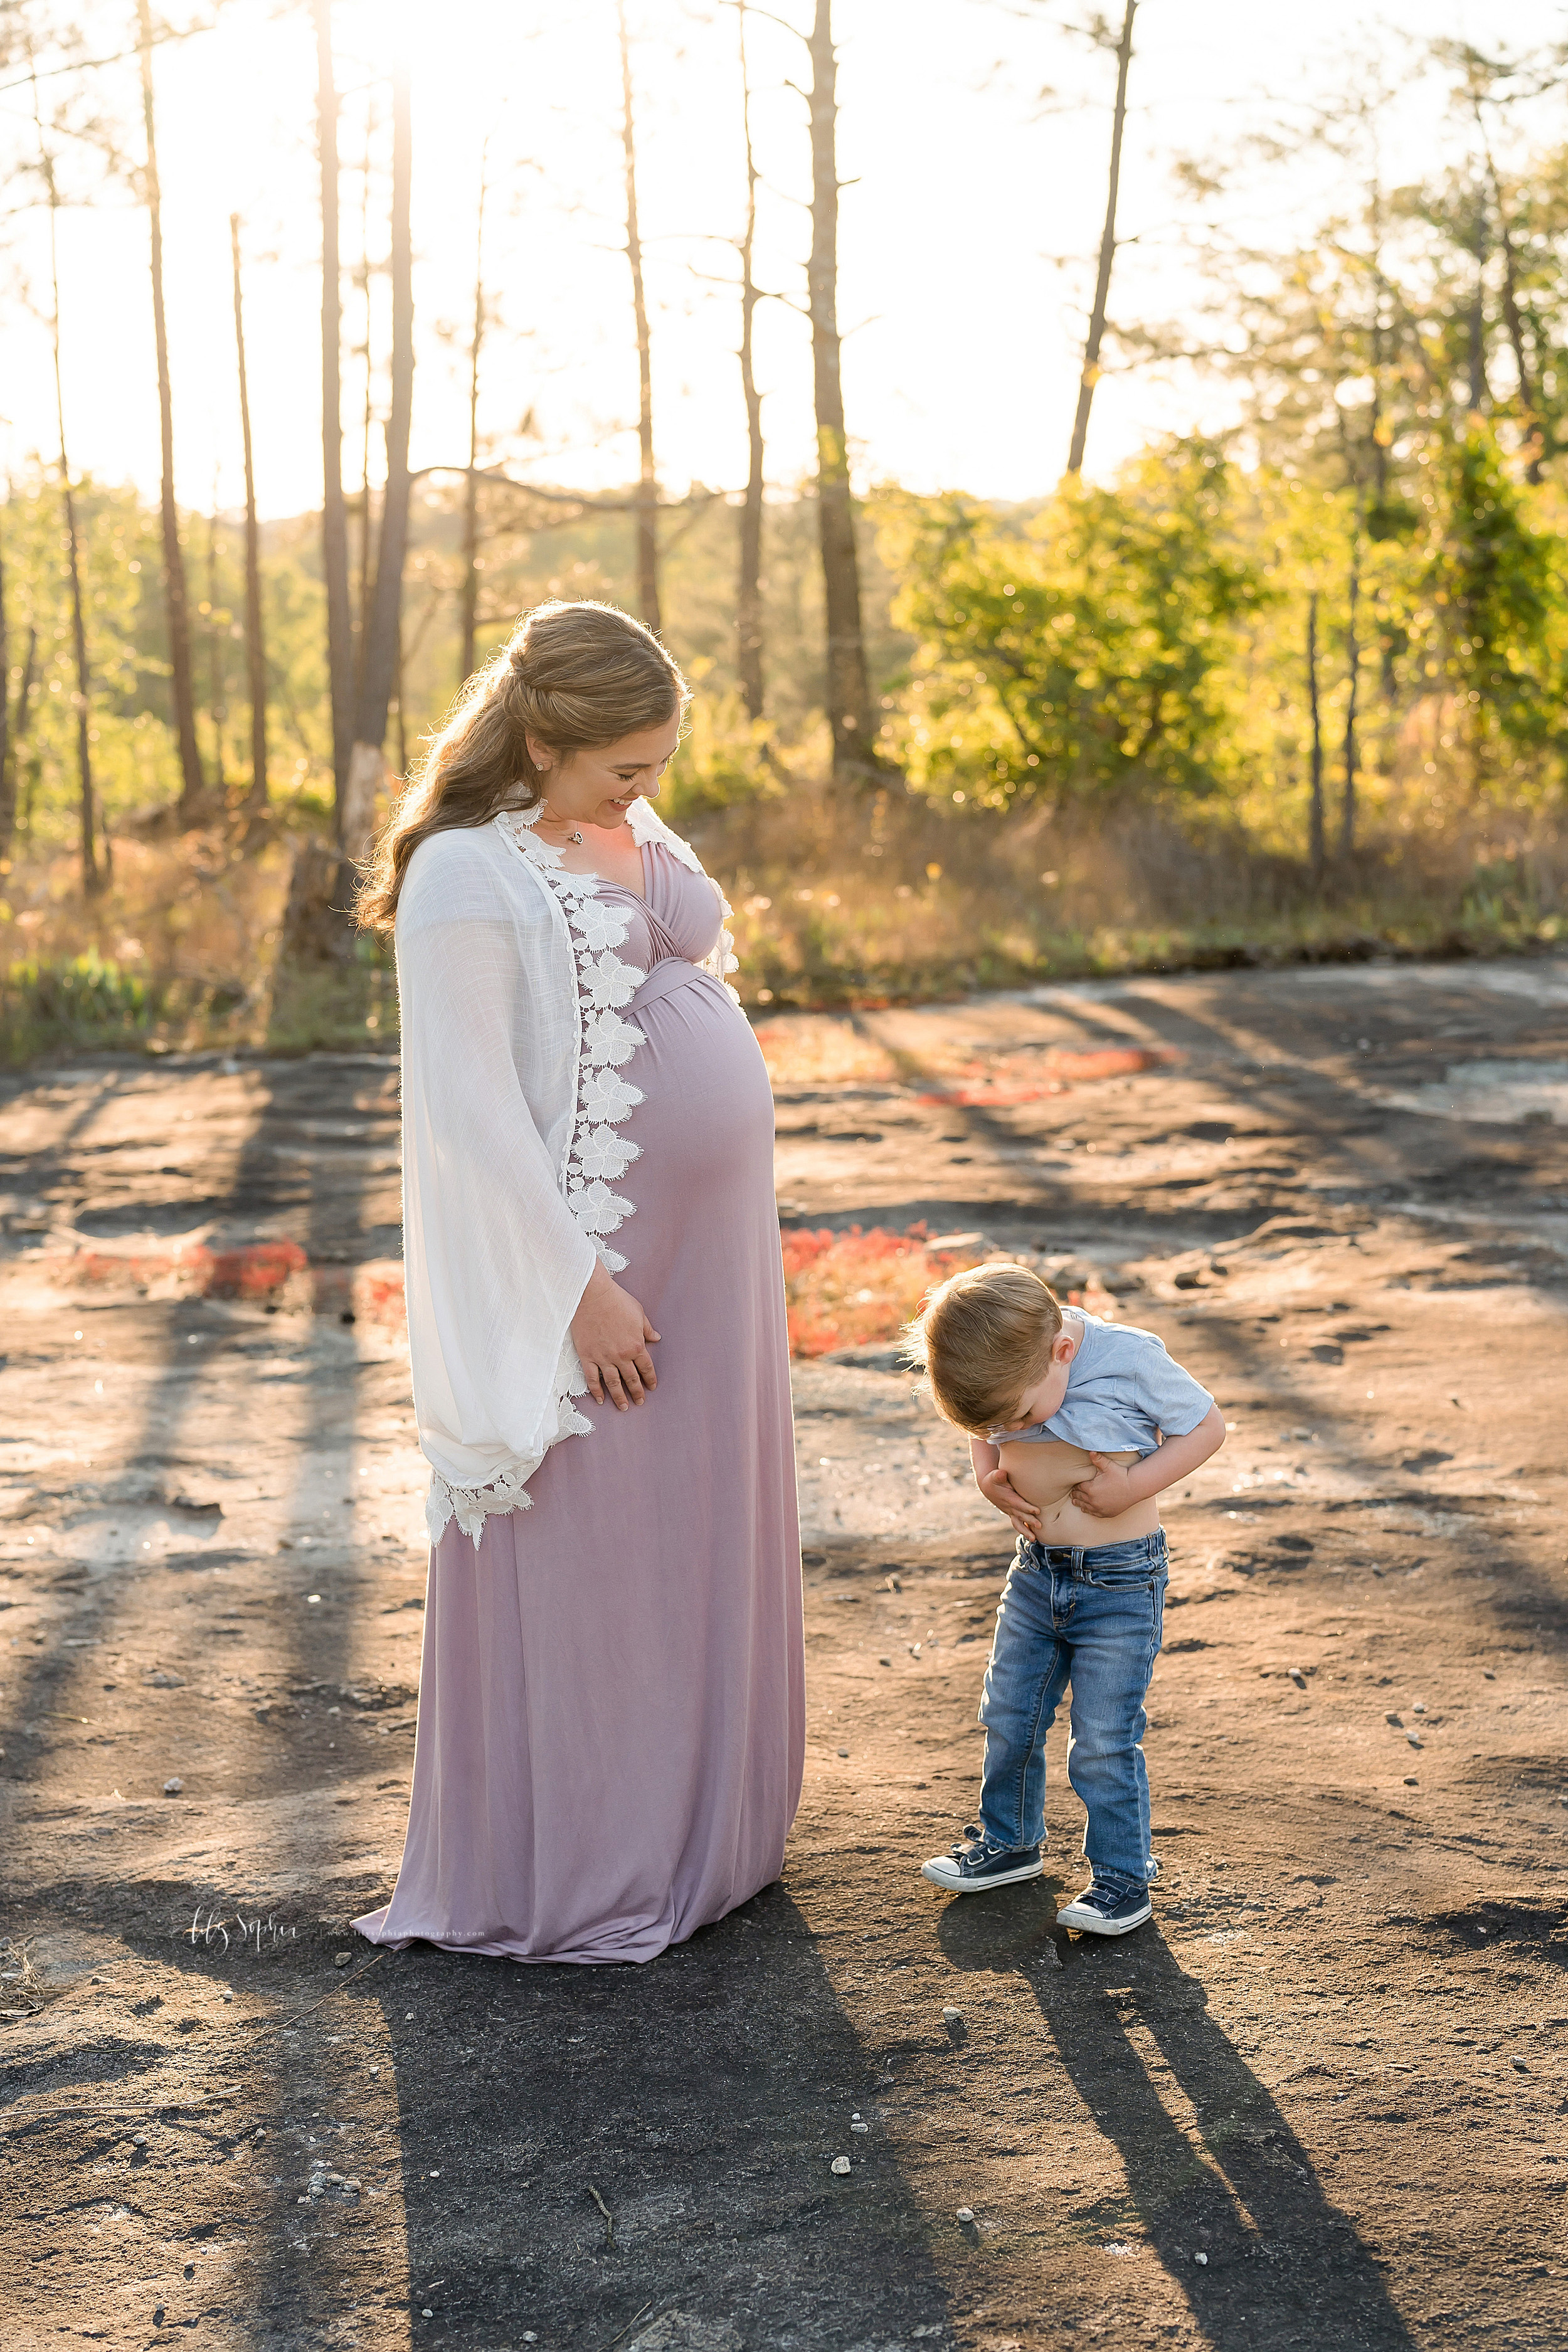 atlanta-brookhaven-decatur-candler-park-sandy-springs-buckhead-virginia-highlands-west-end-decatur-lily-sophia-photography-family-big-brother-expecting-newborn-baby-girl-couples-family-maternity-outdoor-session_1584.jpg